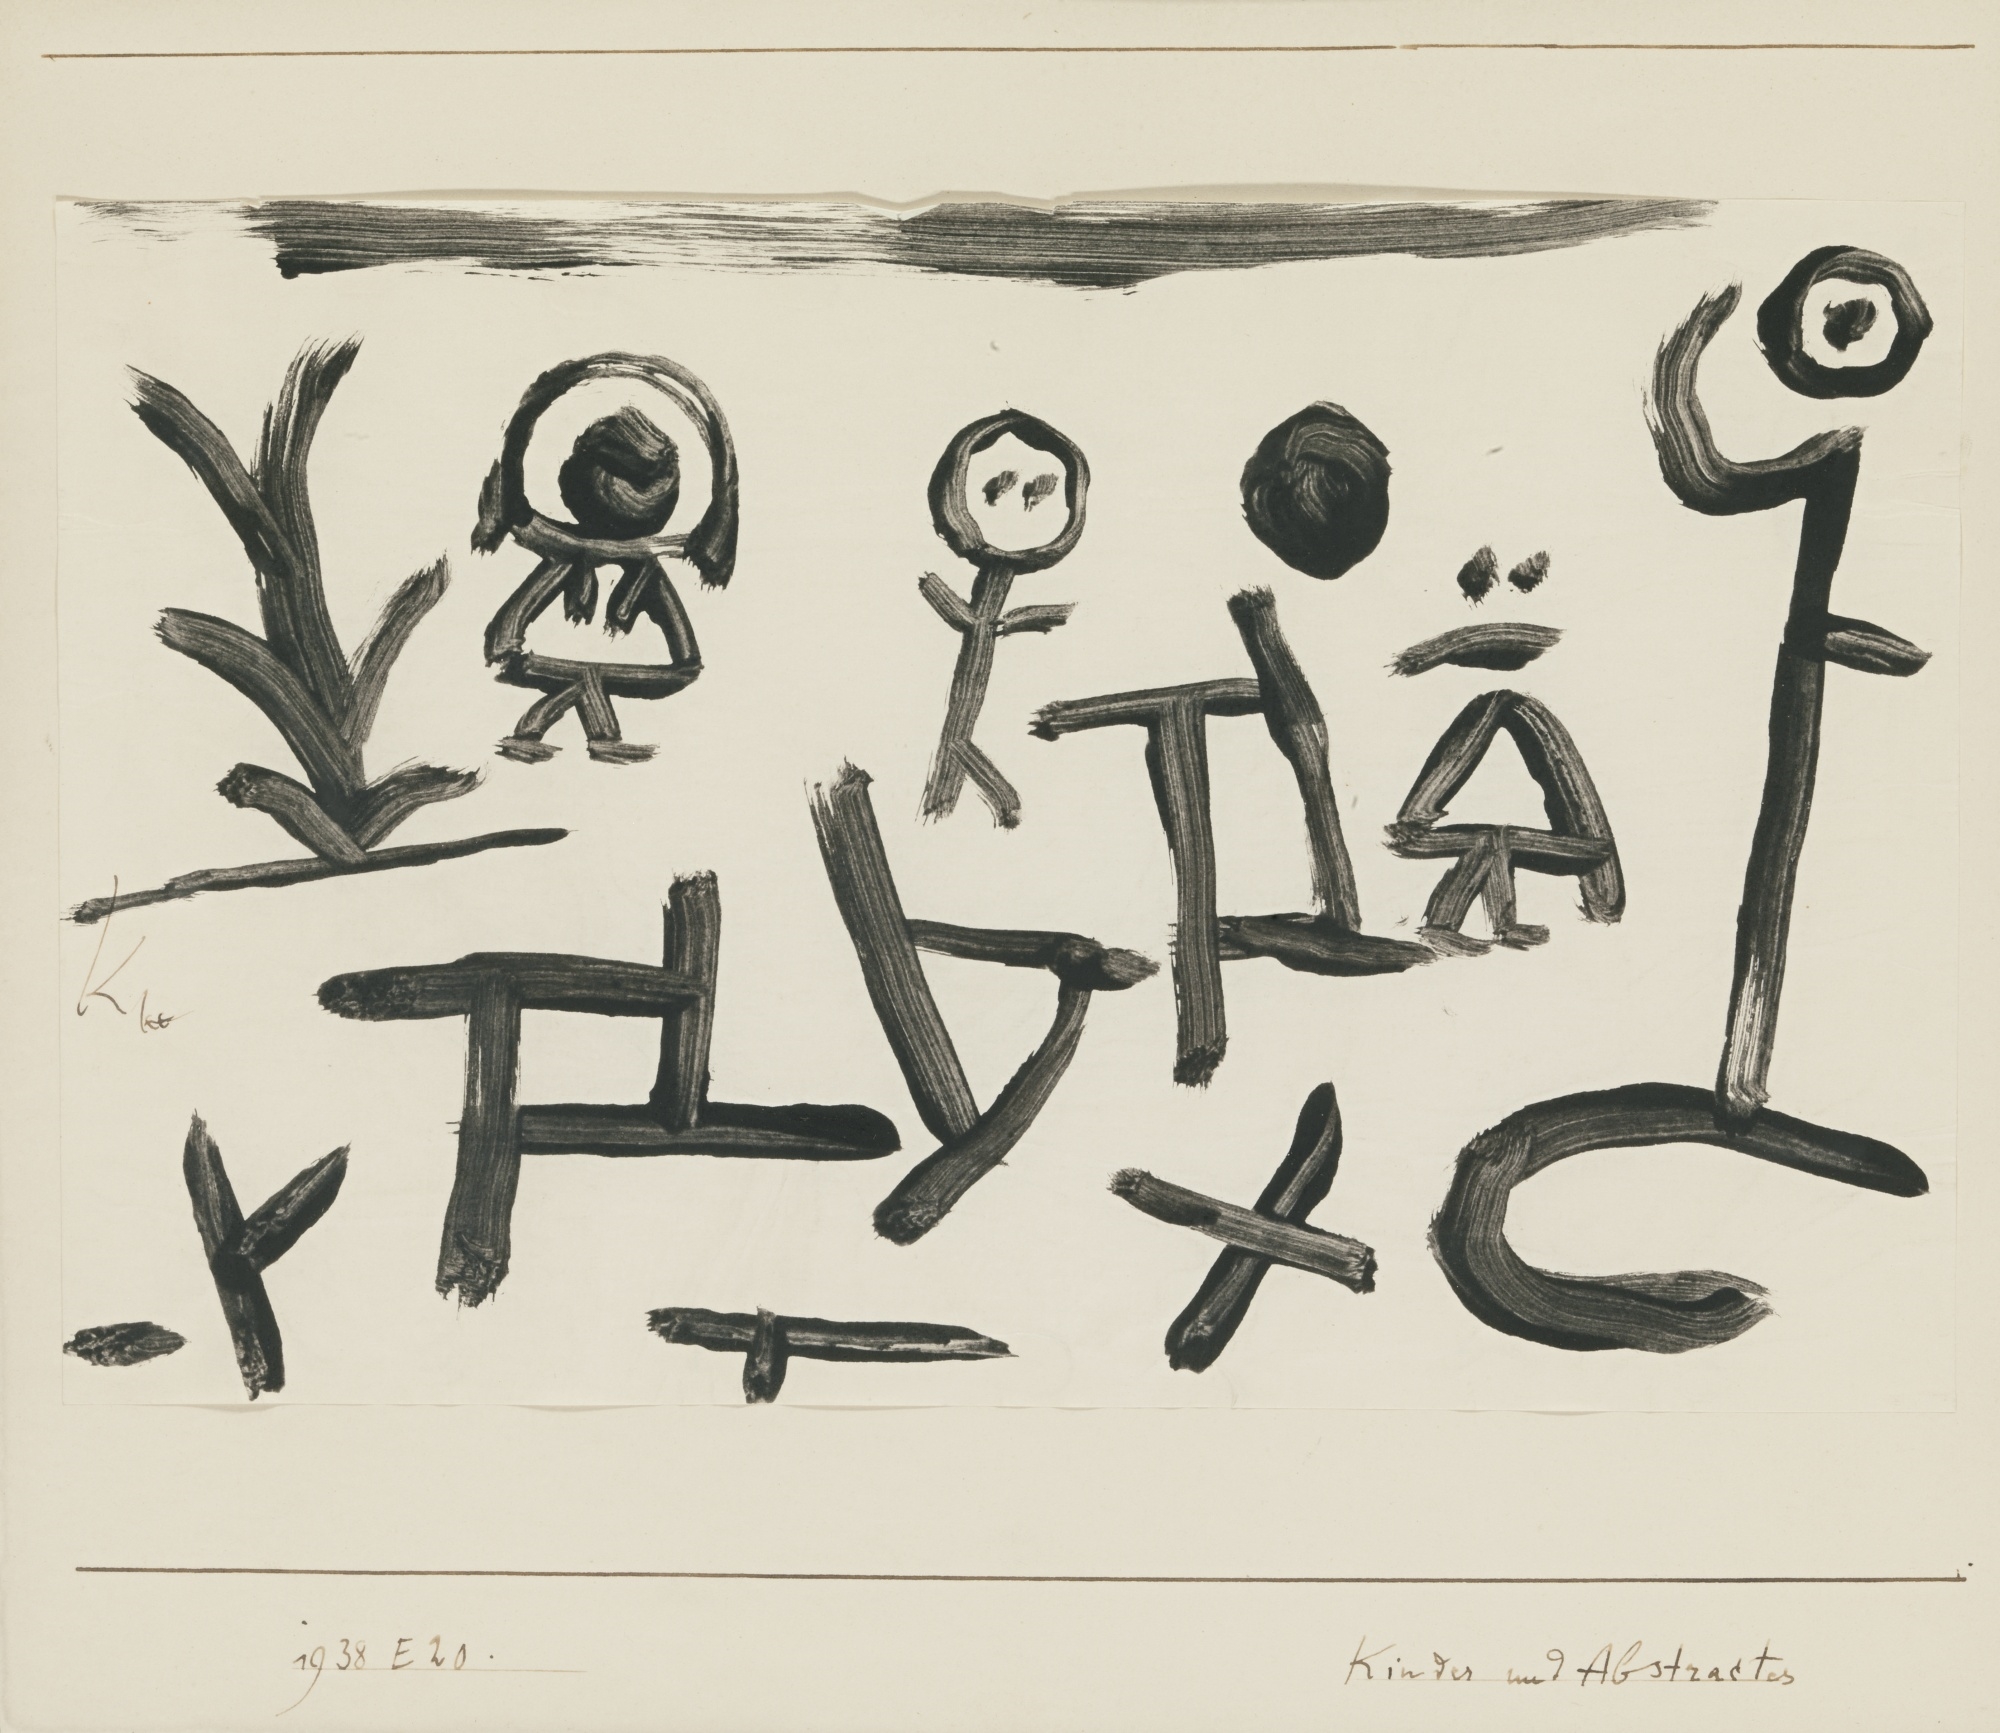 KINDER UND ABSTRACTES (CHILDREN AND ABSTRACTIONS) by Paul Klee, 1938